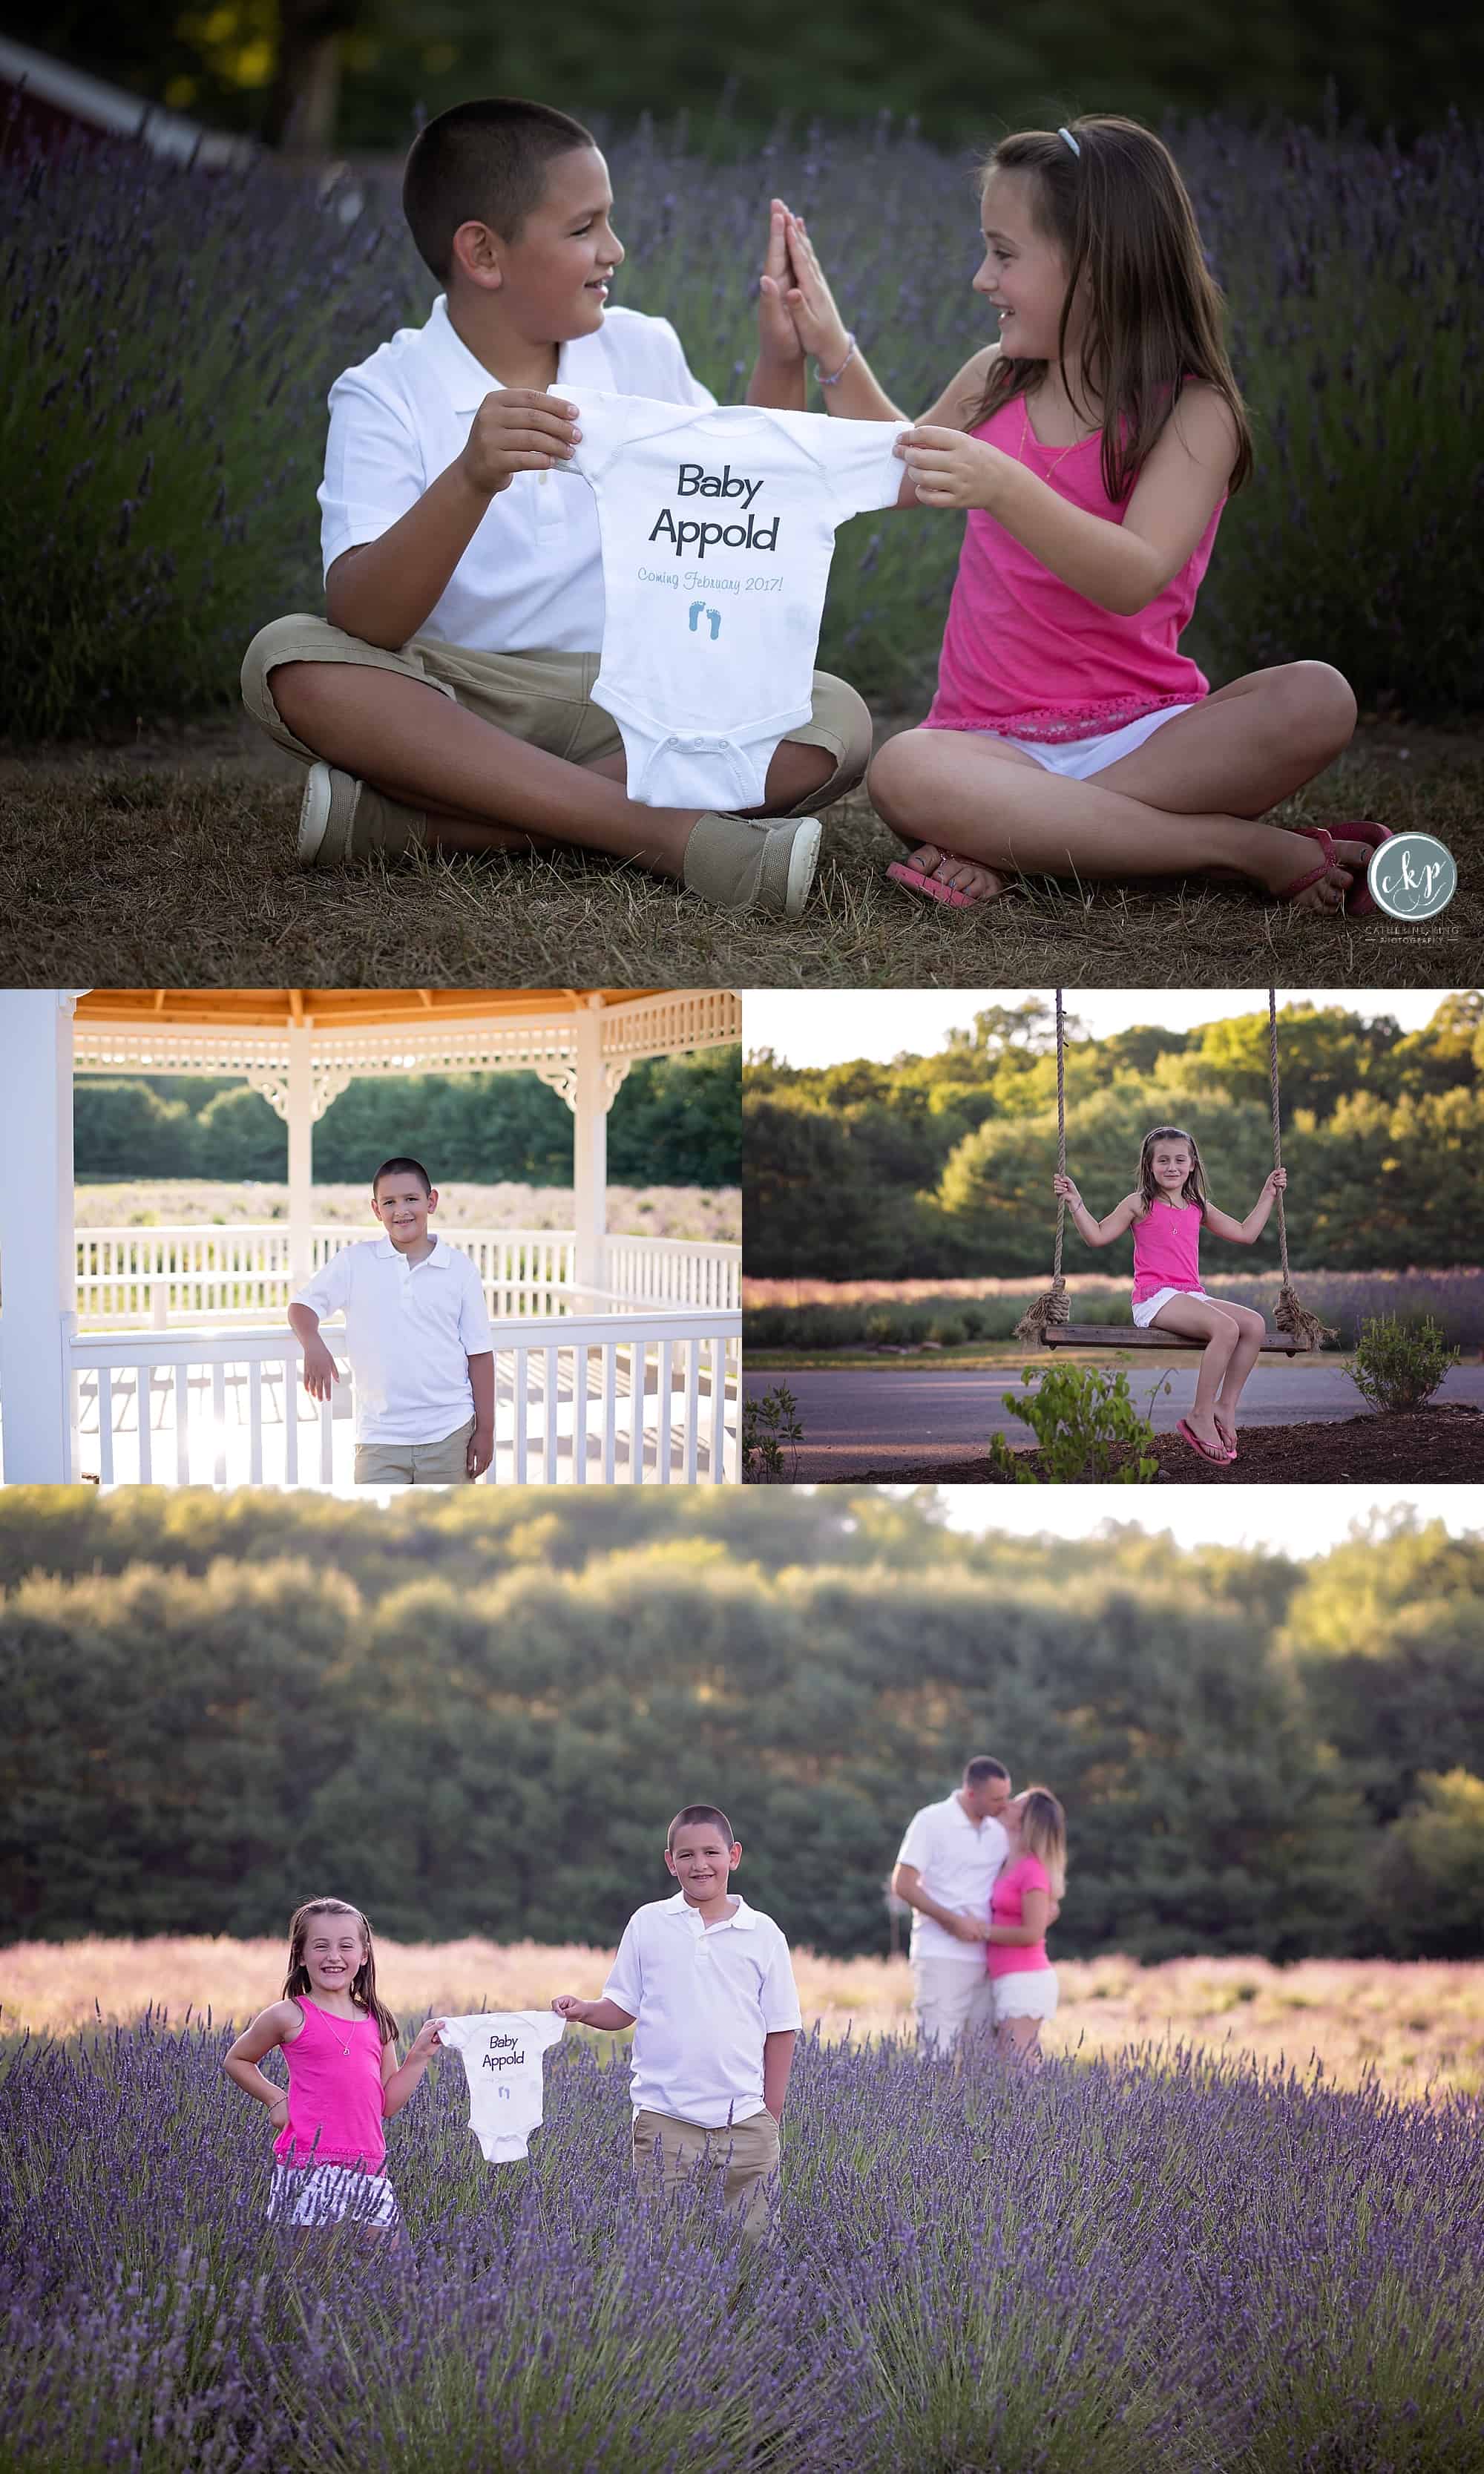 a beautiful summer evening photography sessions at lavender pond farm with a family of 4 expecting a baby with ct family photographer catherine king photographer